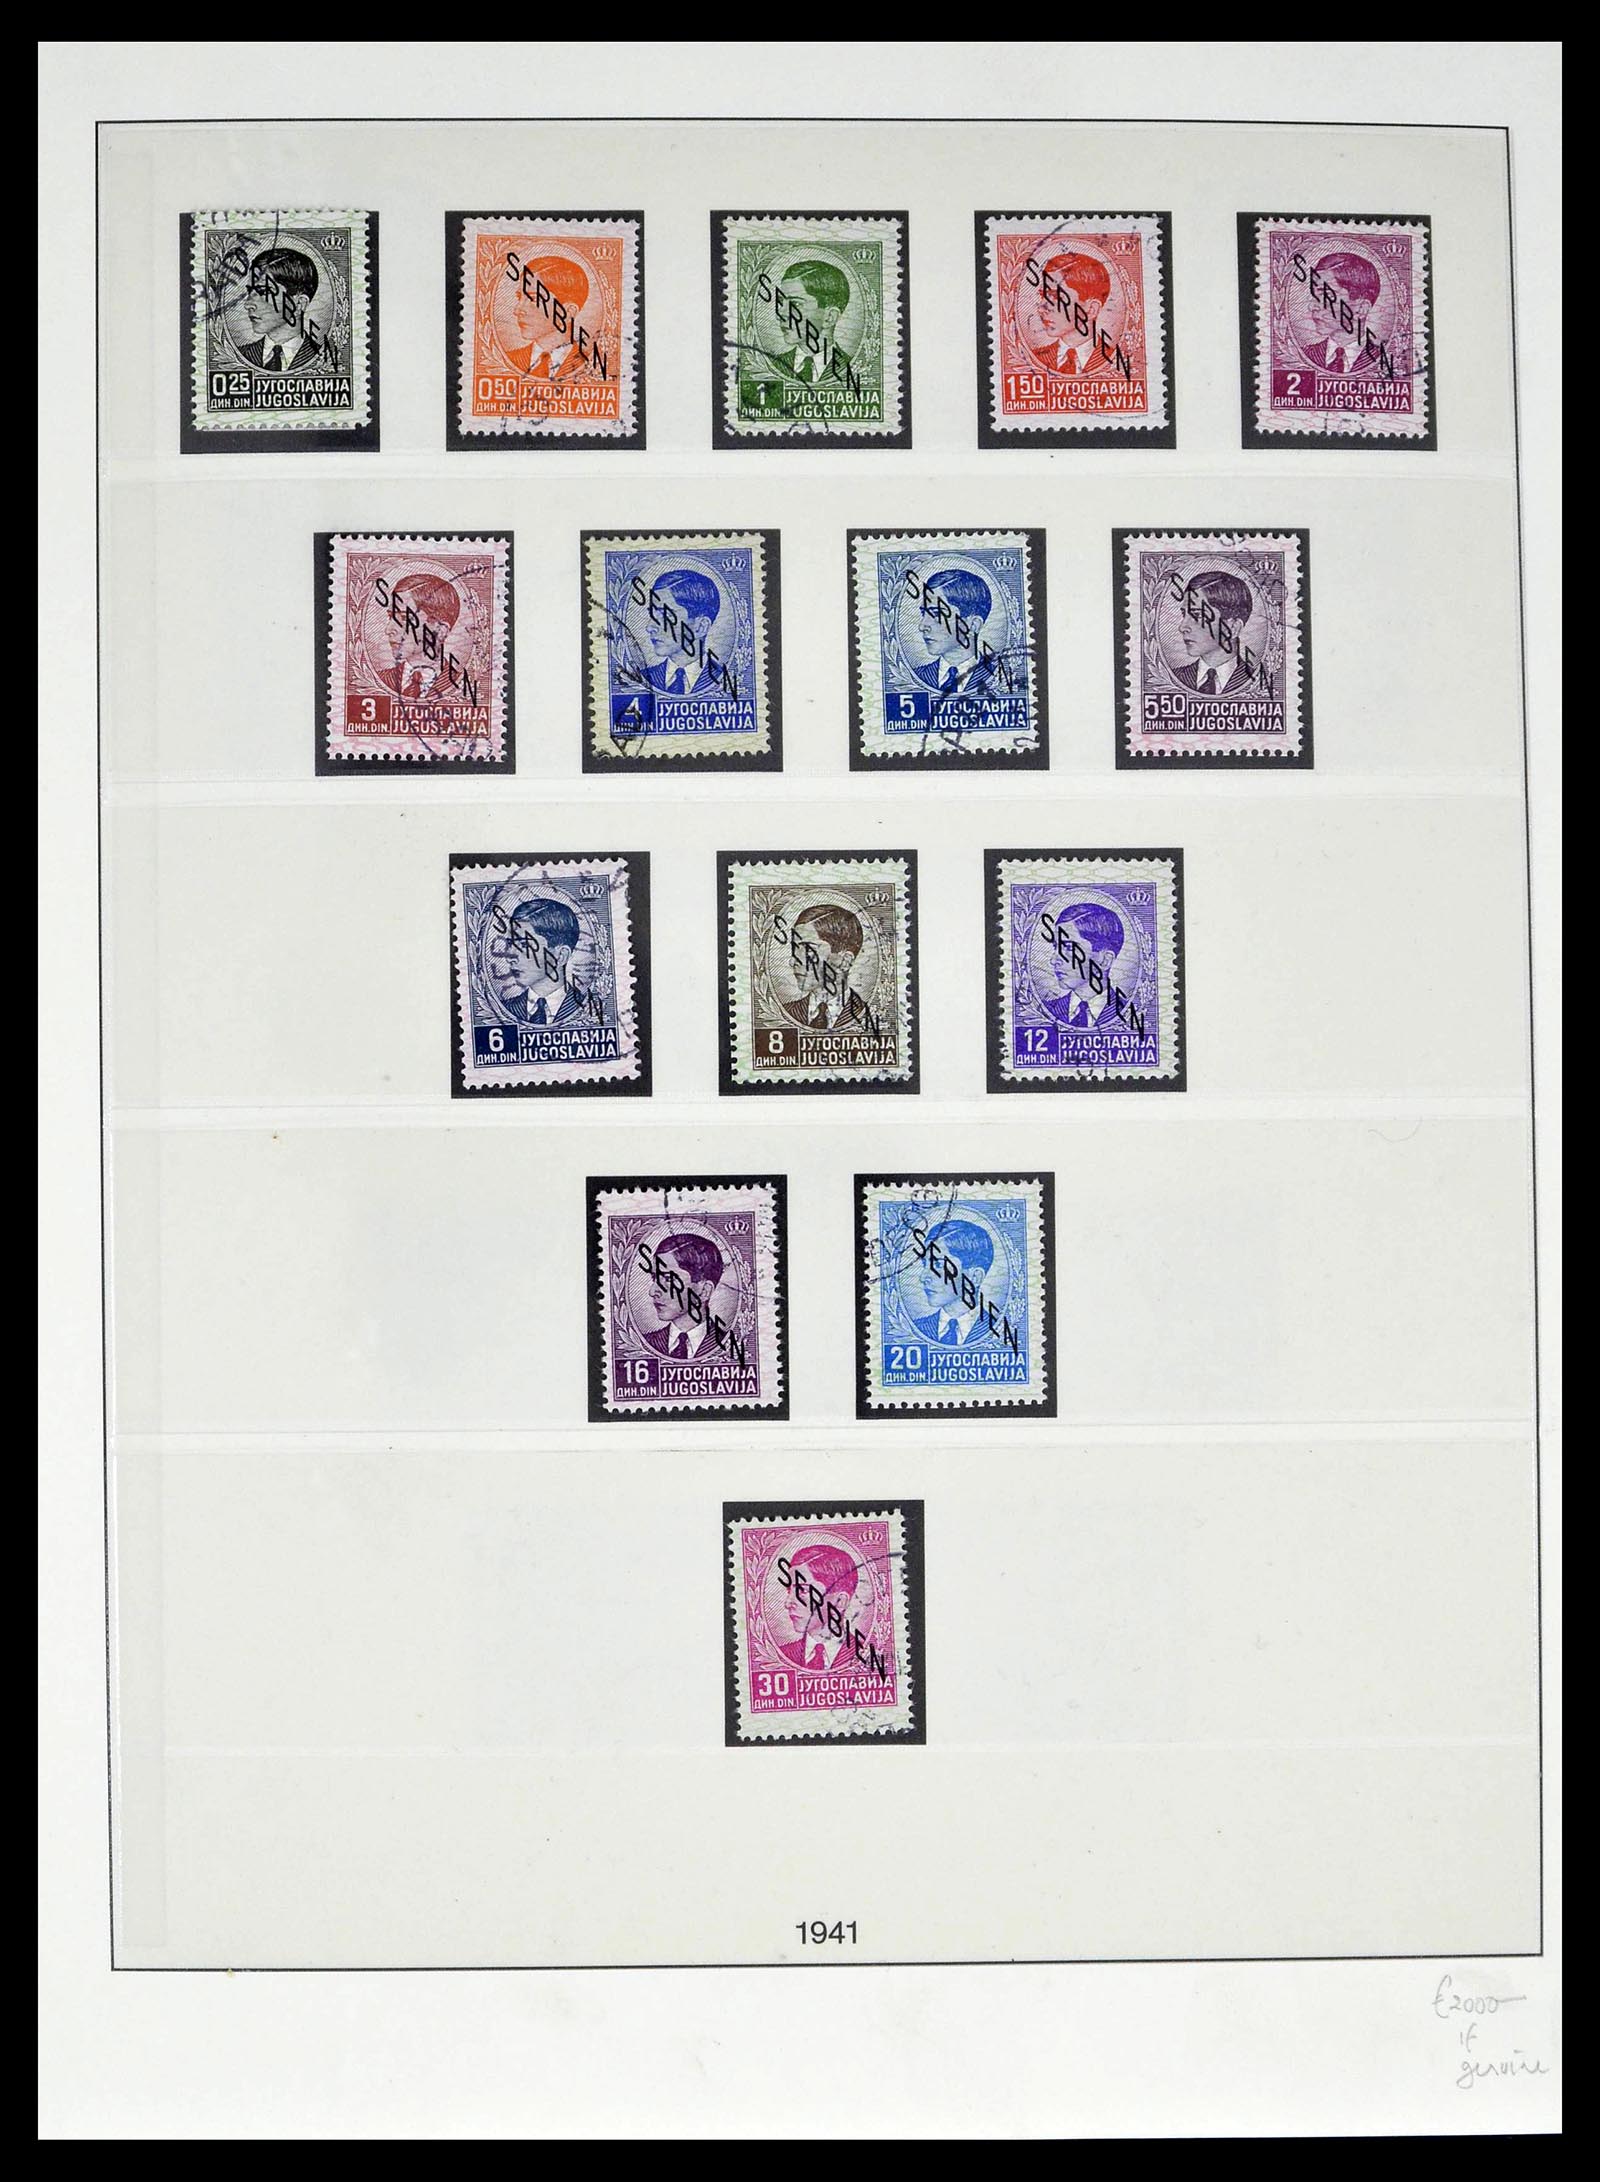 39396 0011 - Stamp collection 39396 German occupation WW II 1939-1945.